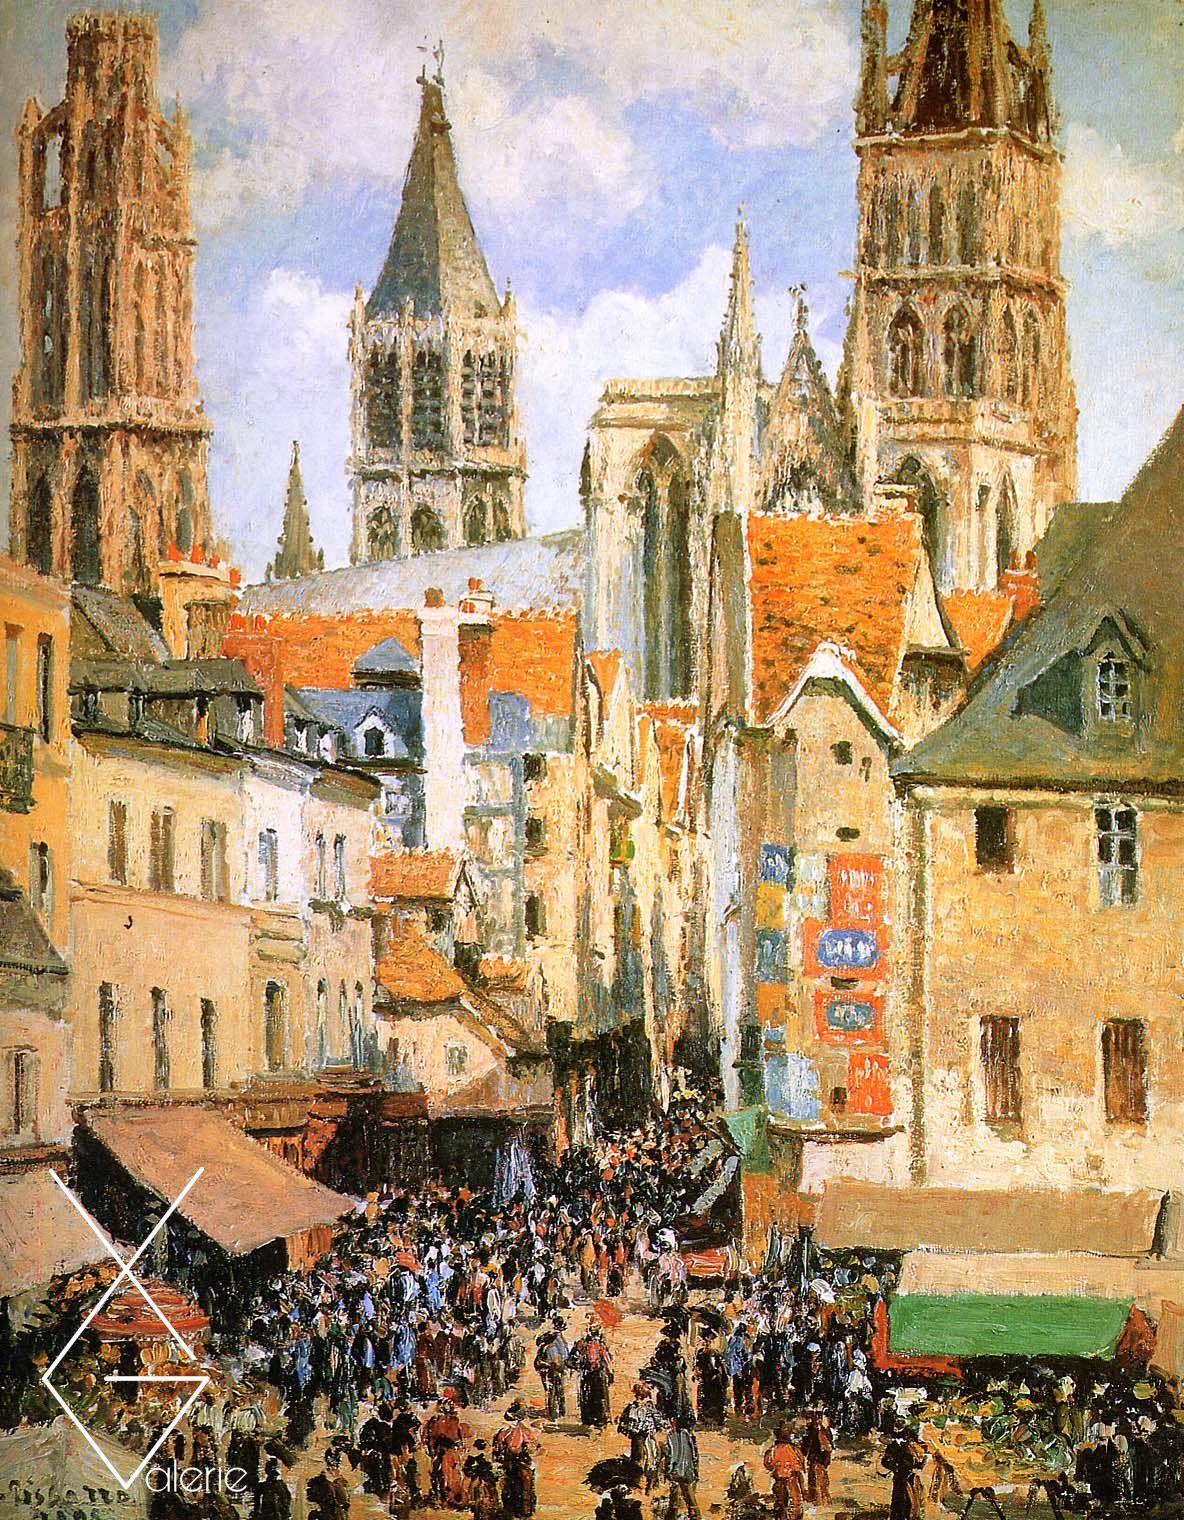 Tranh The old market at Rouen- 1898 - Chợ cũ ở Rouen - Camille Pissarro